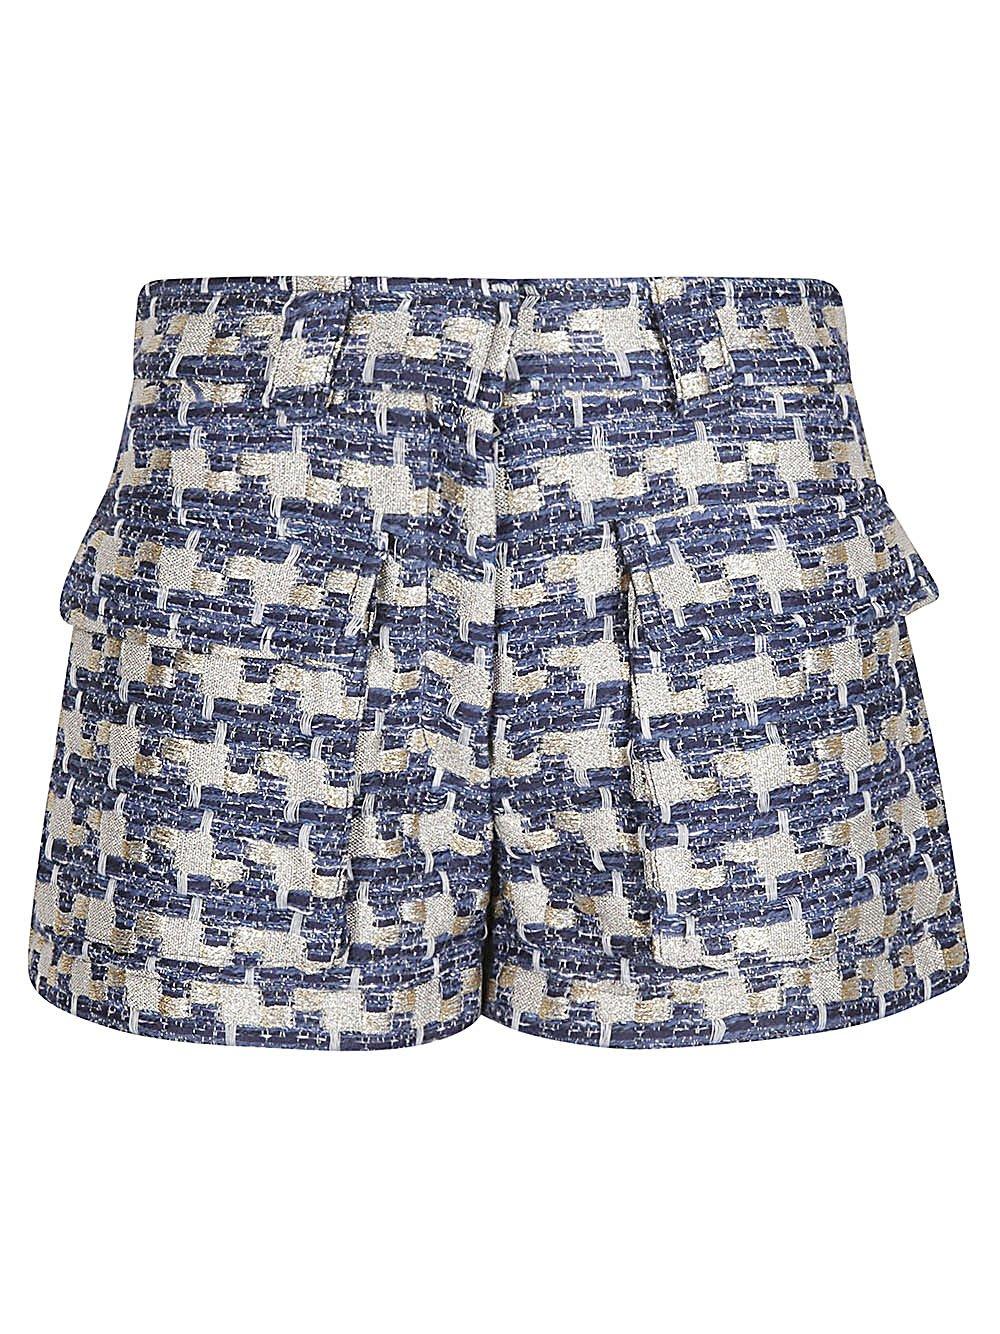 Patterned Thigh-high Shorts